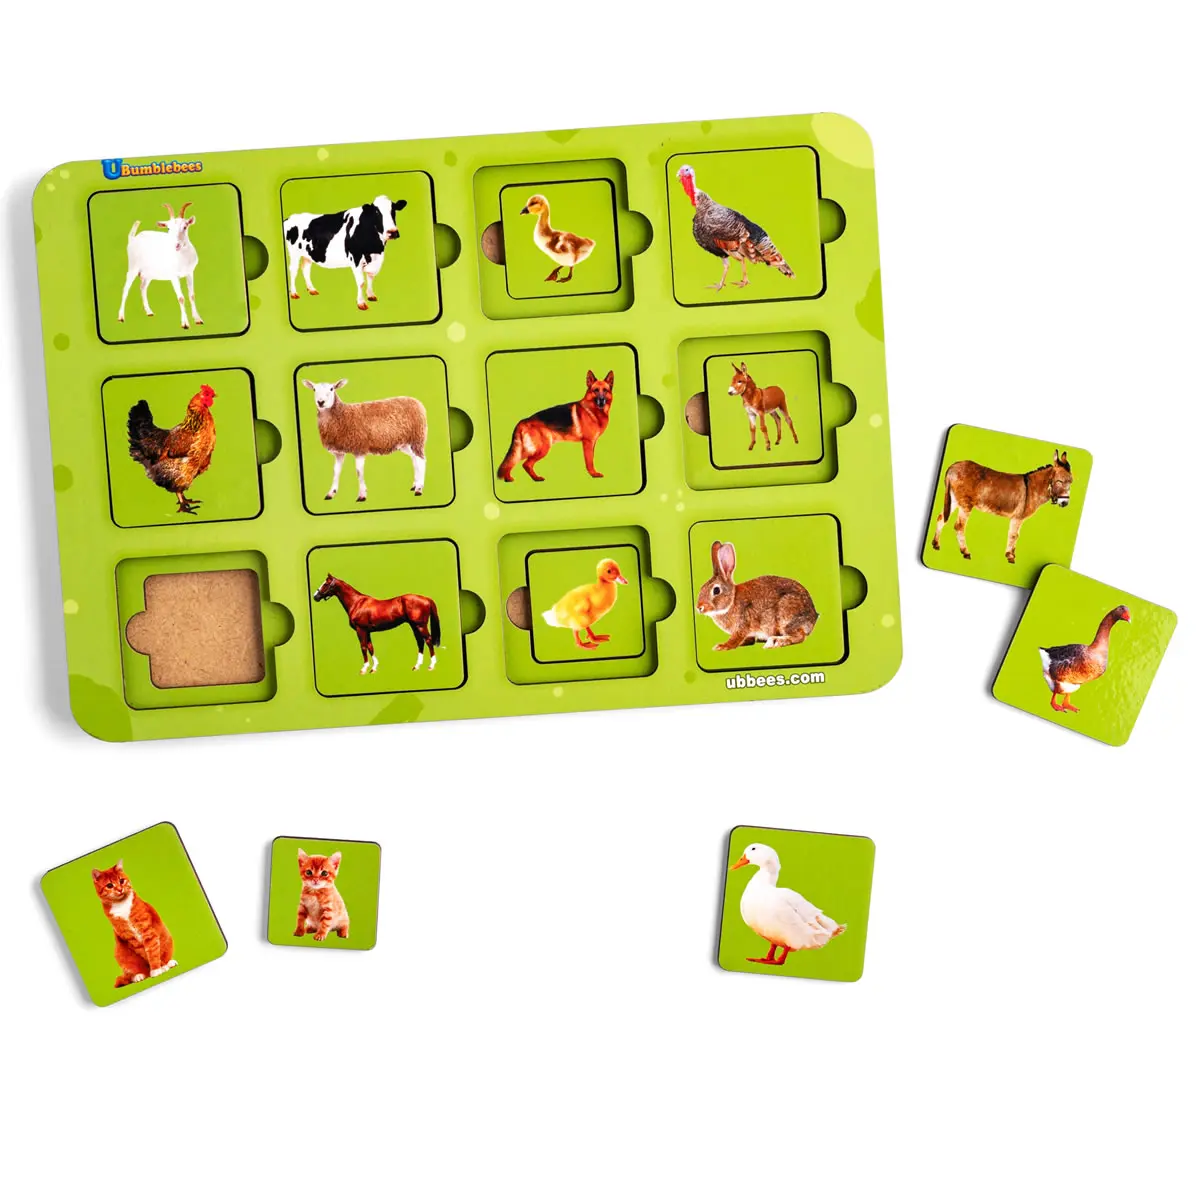 Sorting-puzzle "Mother and baby" Pet Animals (picture)